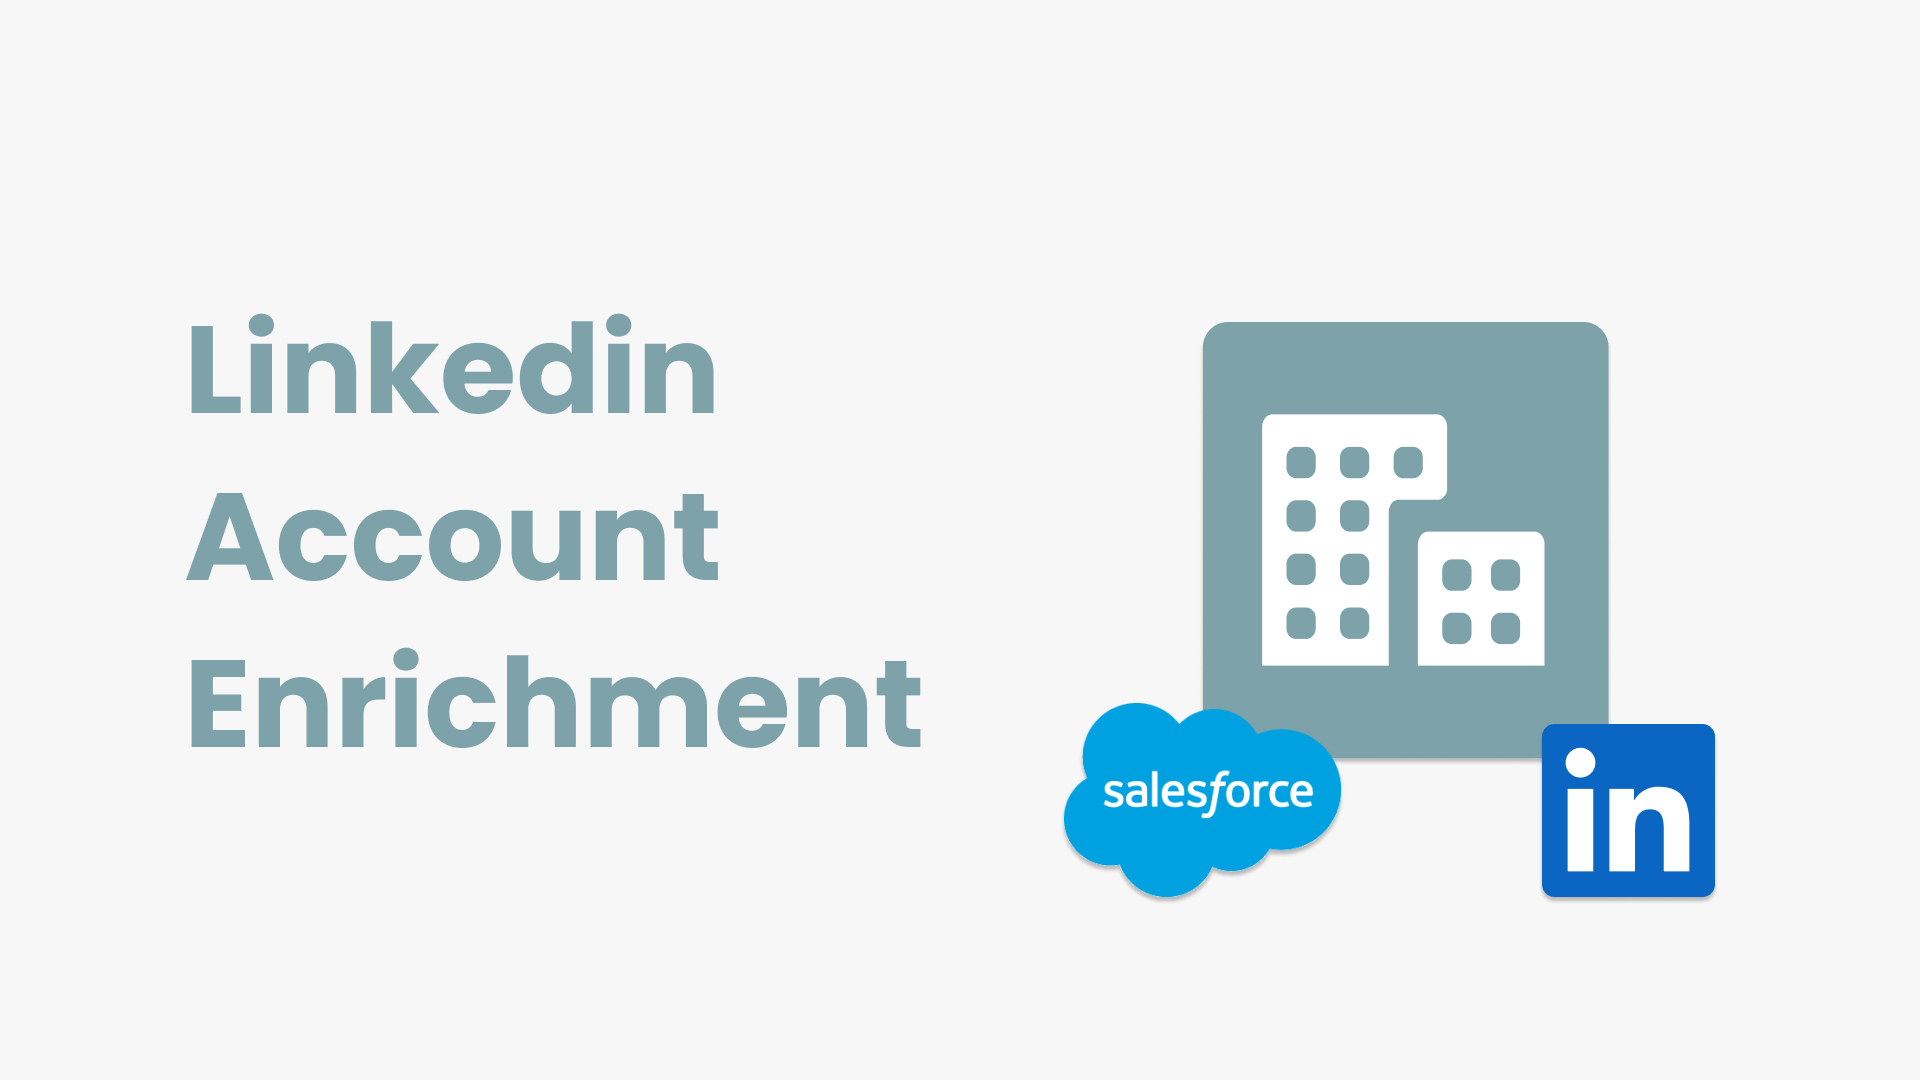 Delpha can enrich Salesforce Accounts with data from LinkedIn.